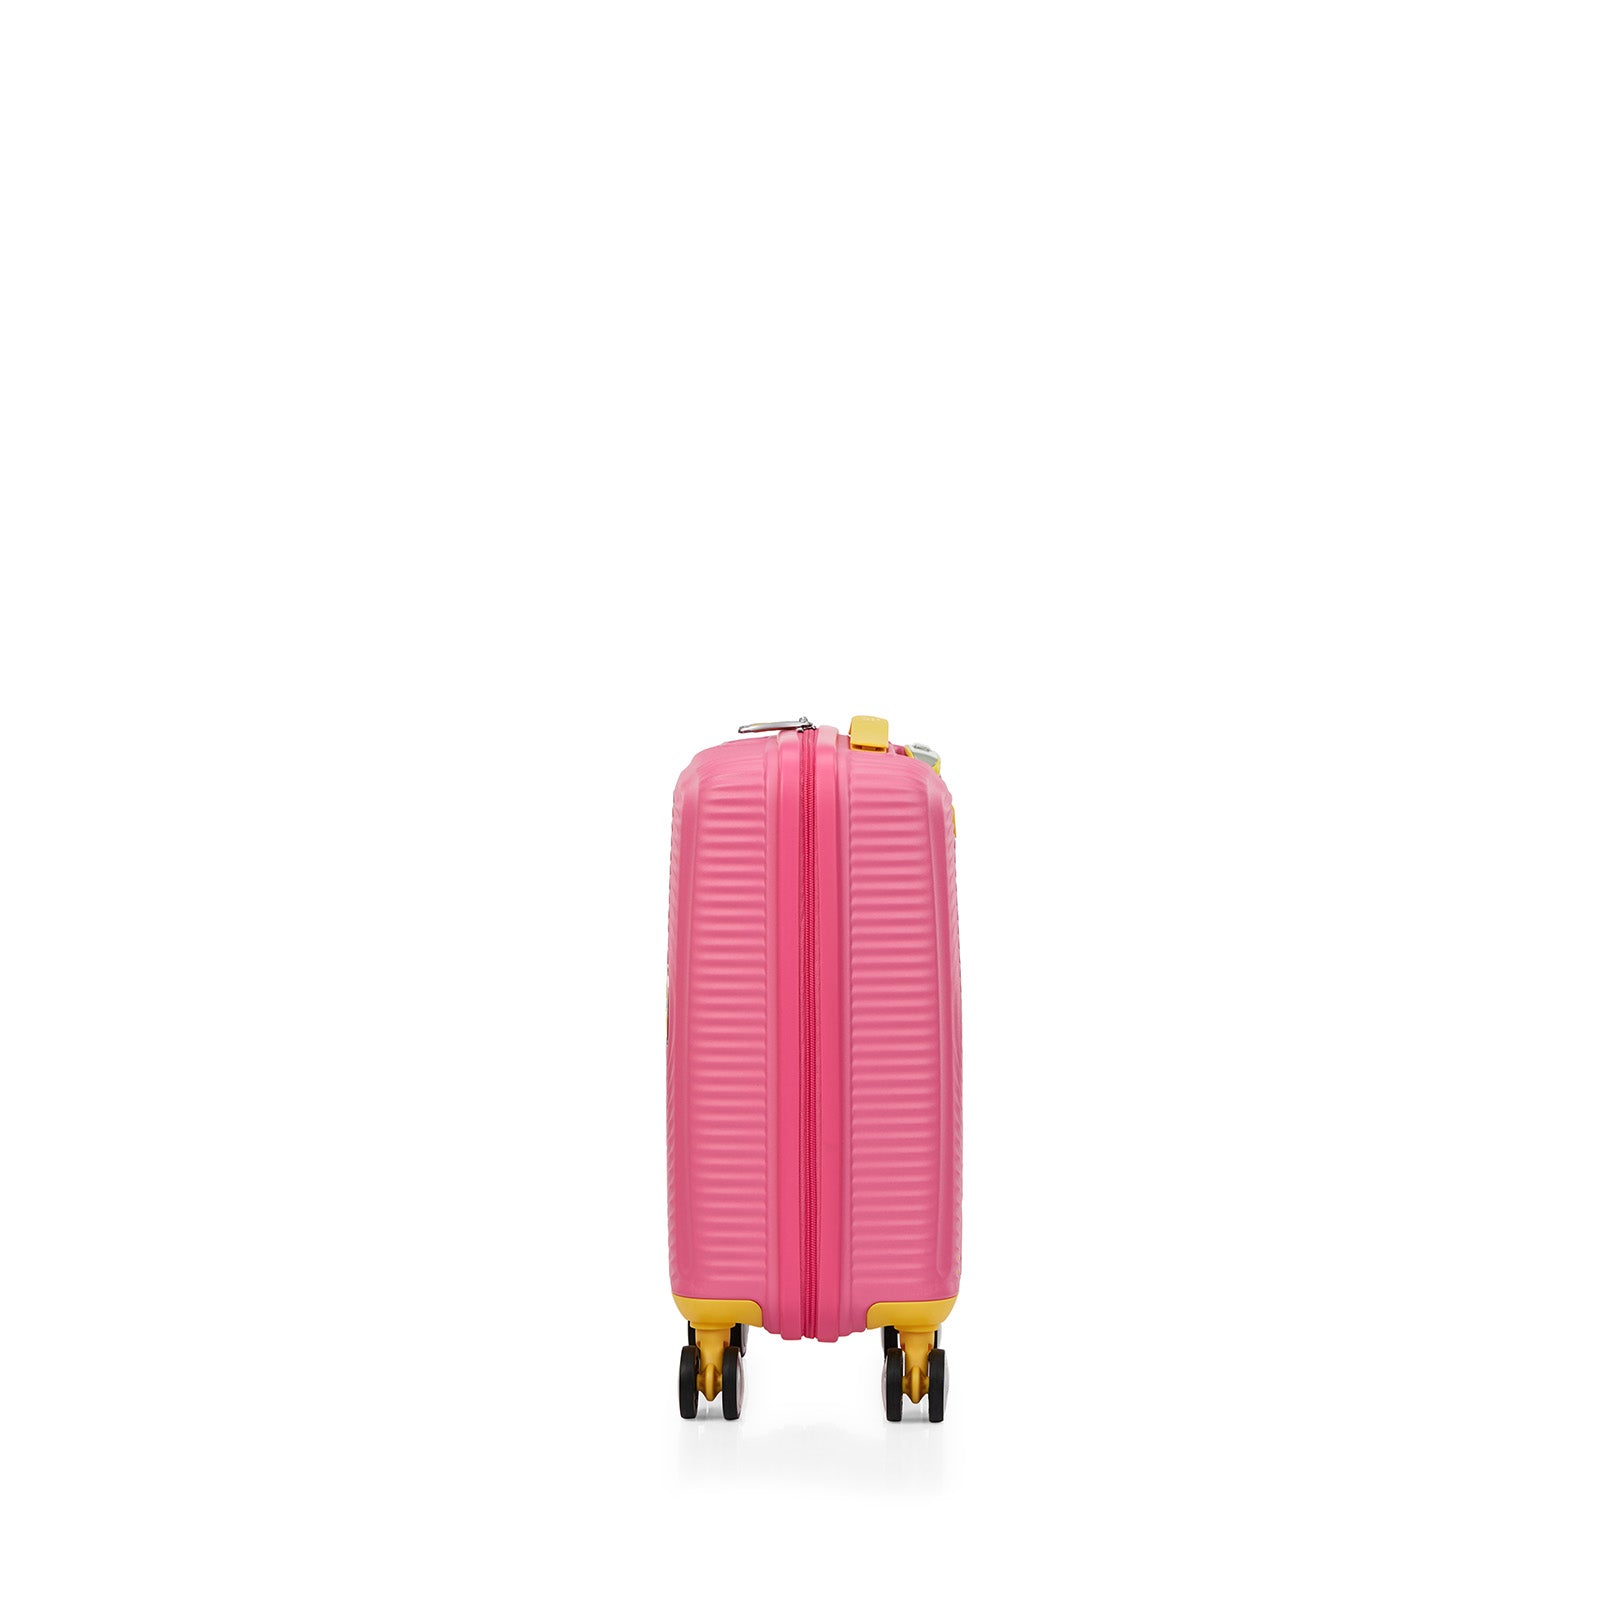 American-Tourister-Little-Curio-47cm-Carry-On-Suitcase-Pink-Yellow-Side